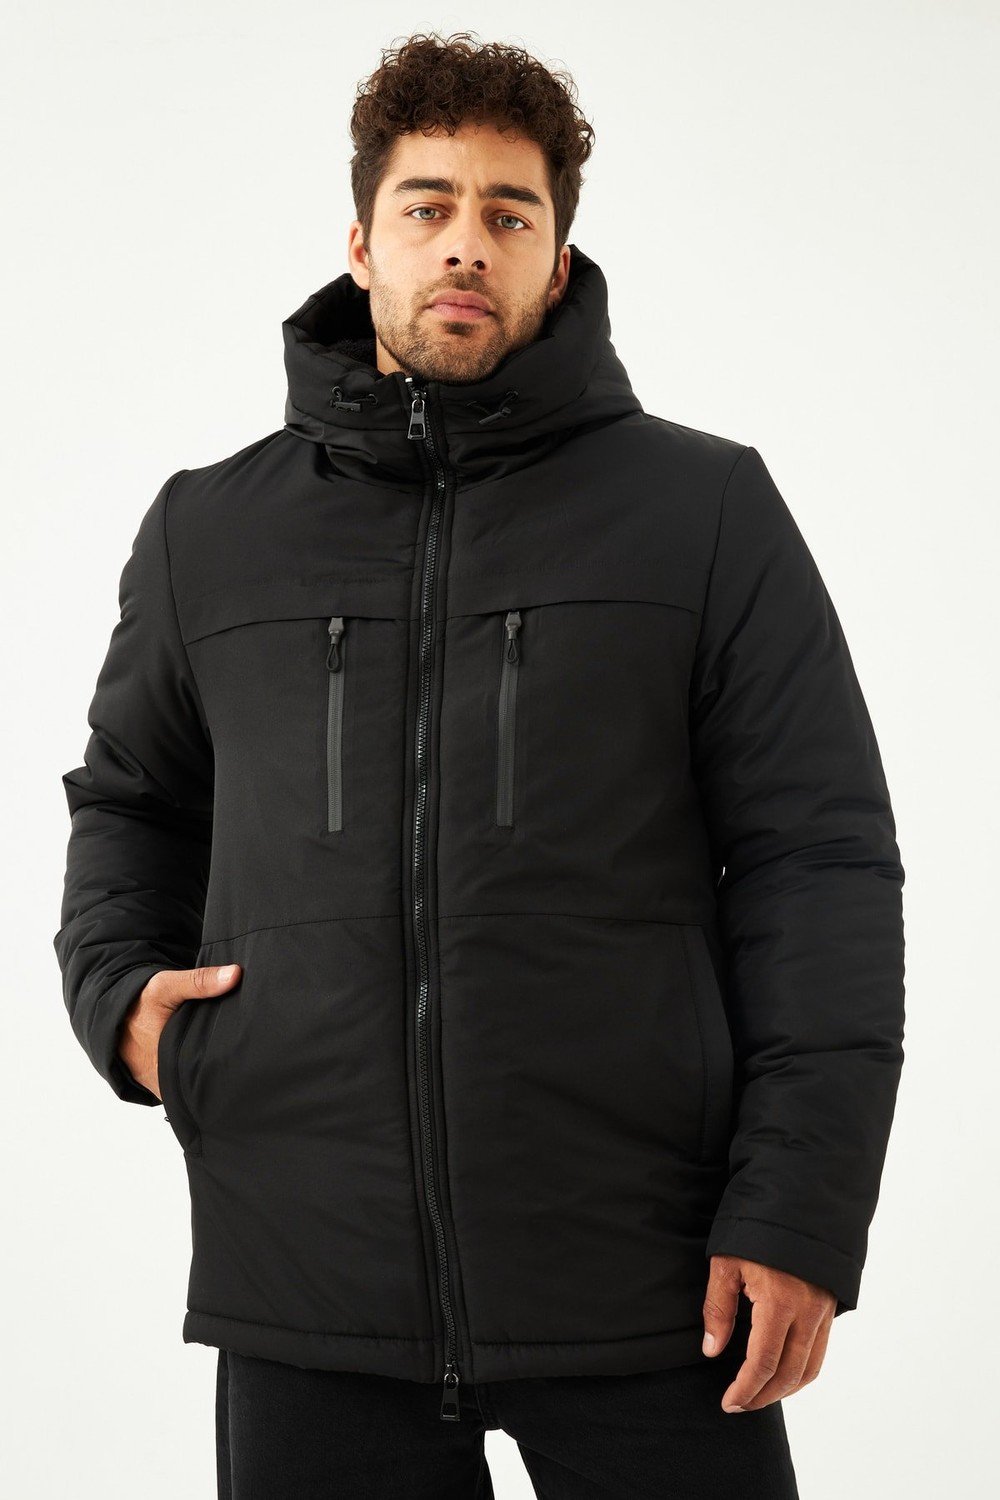 D1fference Men's Black Shearling Inner Waterproof And Windproof With Hooded Winter Sports Jacket & Coat & Parka.